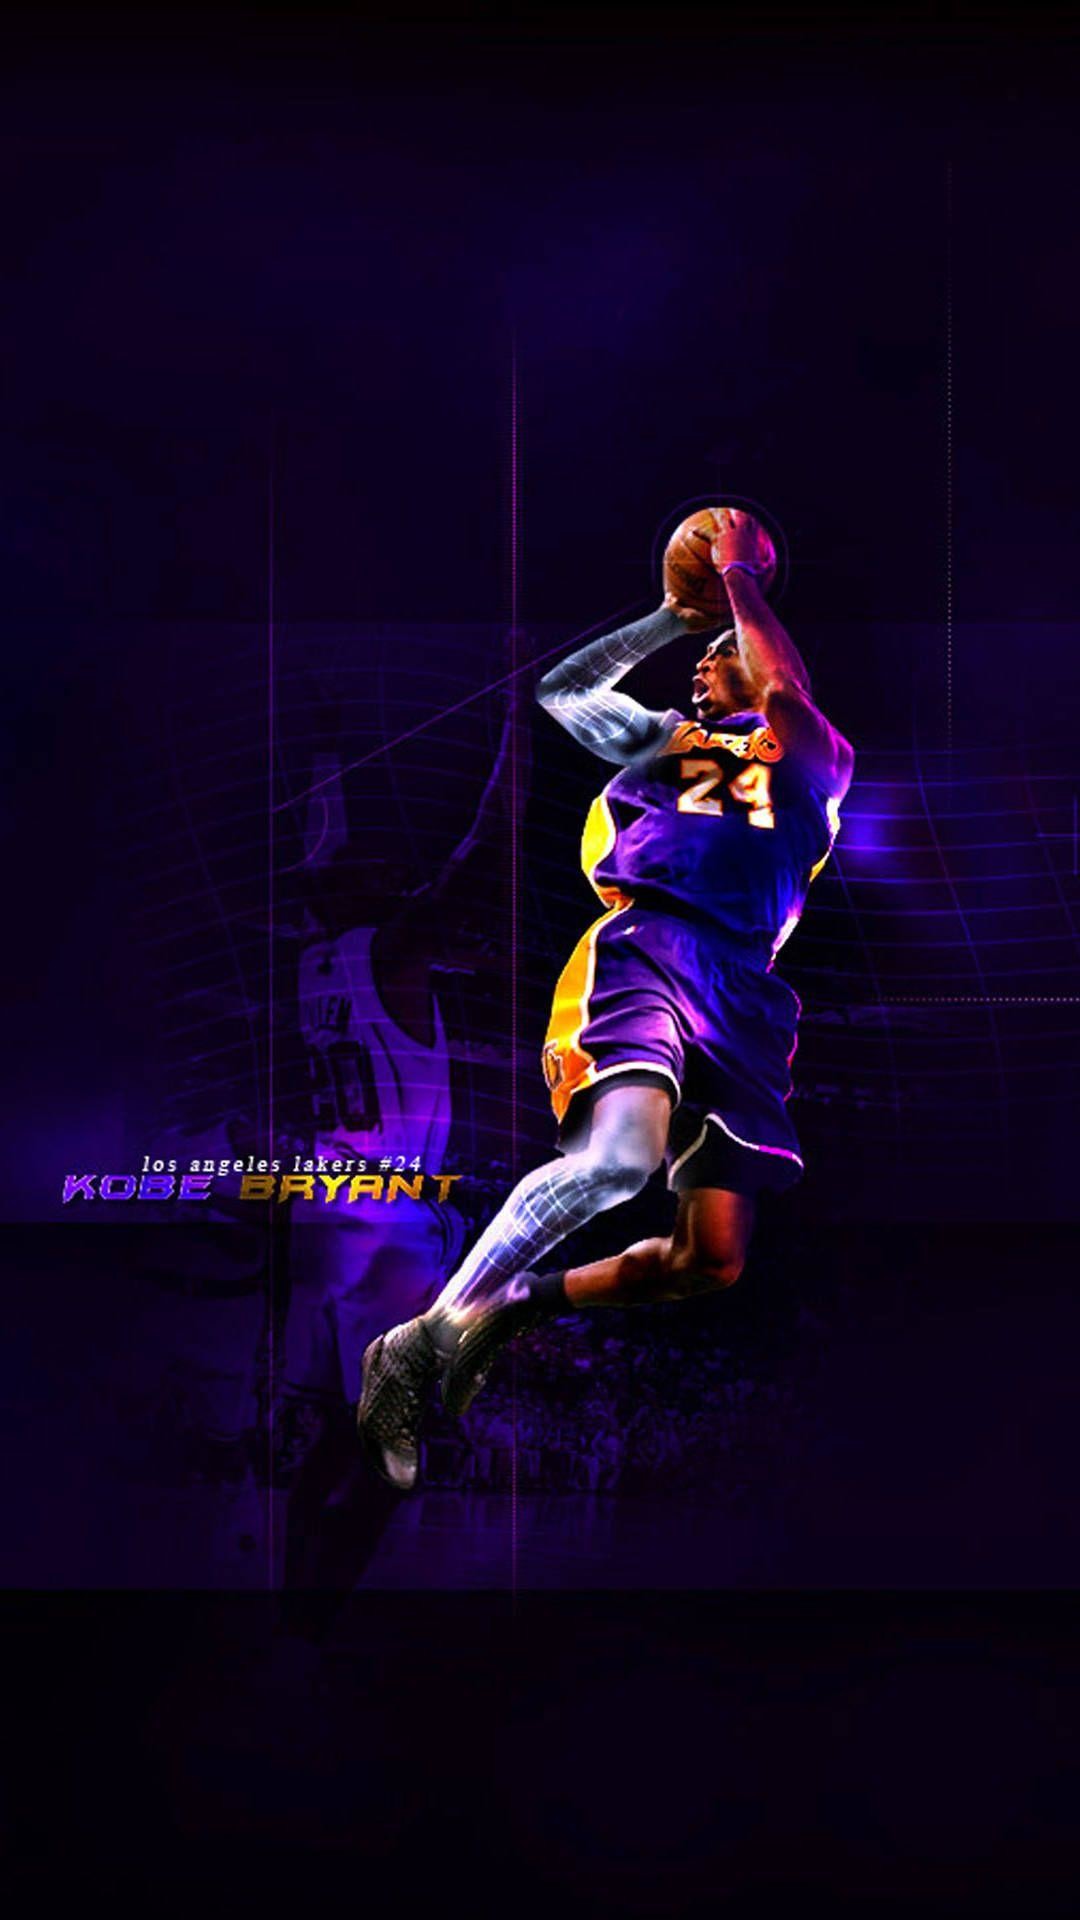 1080x1920 30+ Kobe Bryant Wallpapers HD for iPhone 2016 - Apple Lives